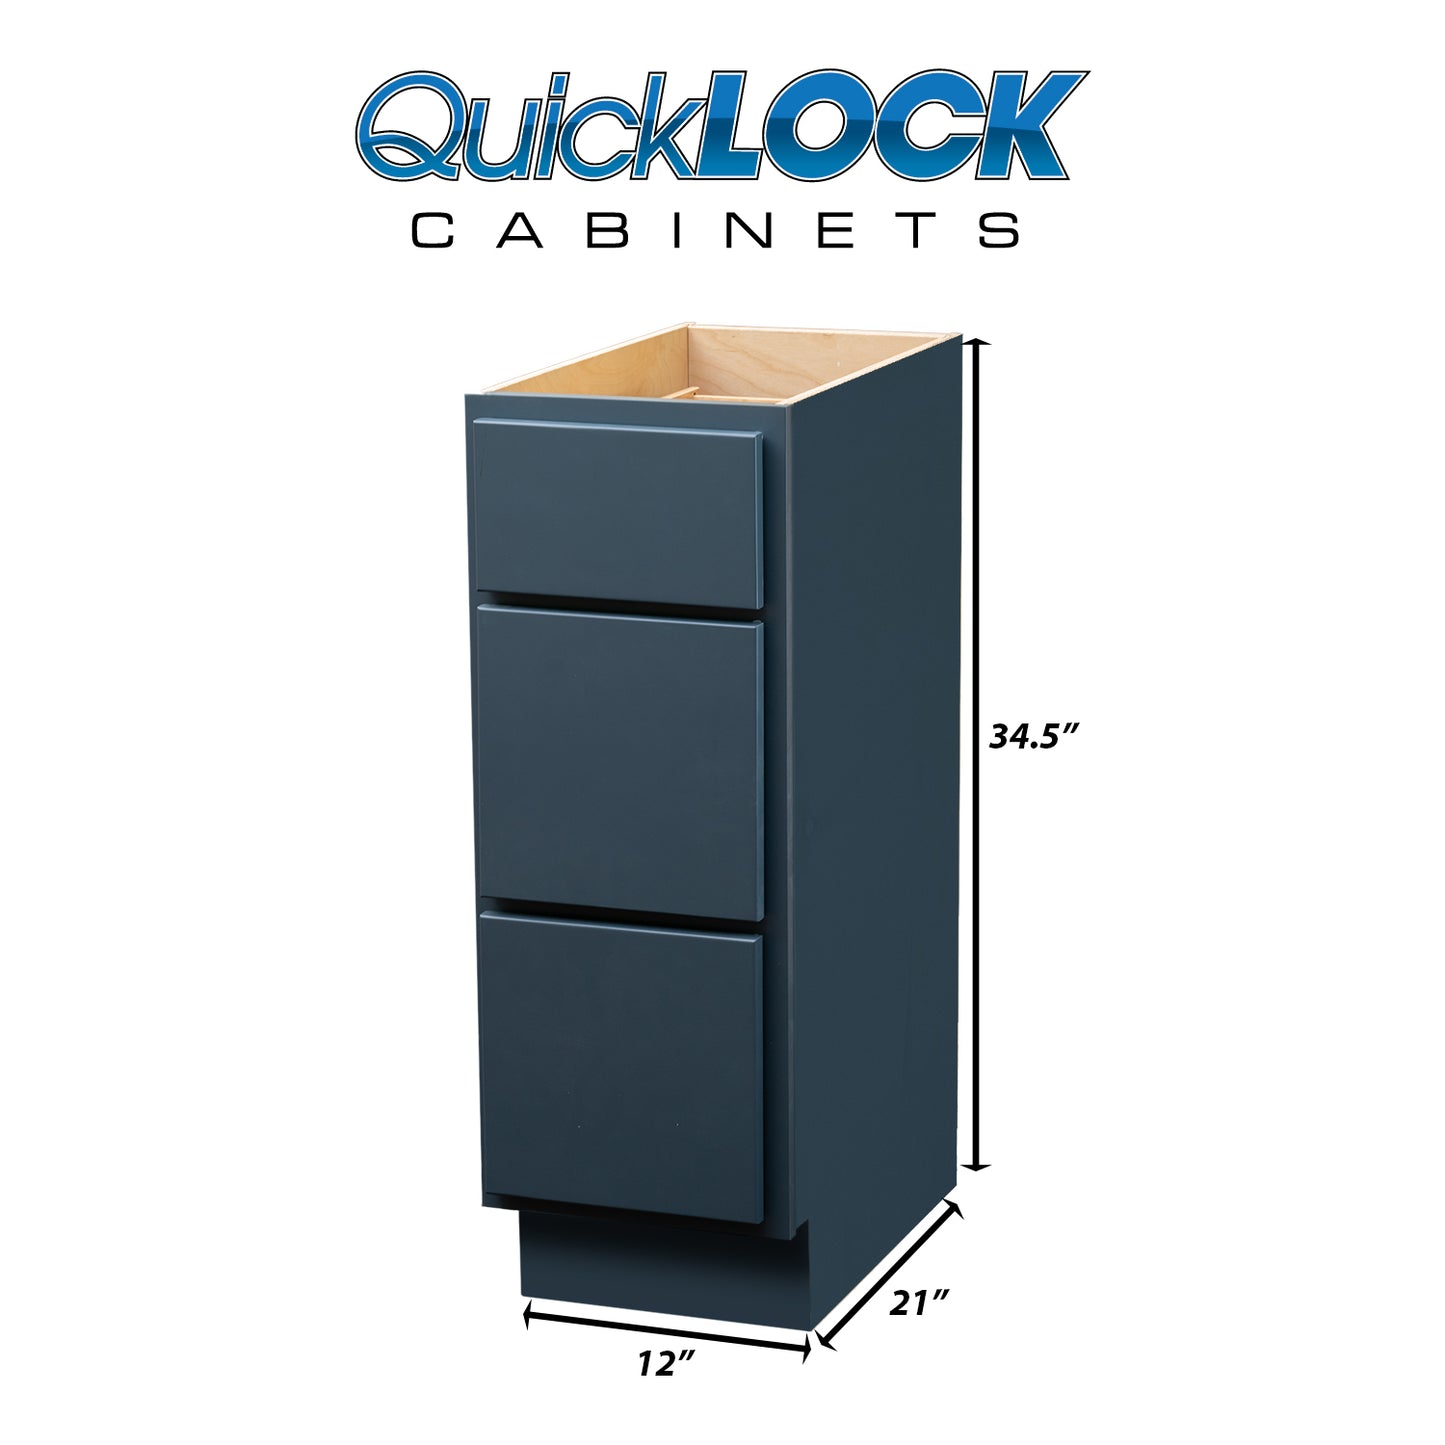 Quicklock RTA (Ready-to-Assemble) Needlepoint Navy 3 Drawer Vanity Base Cabinet | 12"Wx34.5"Hx21"D